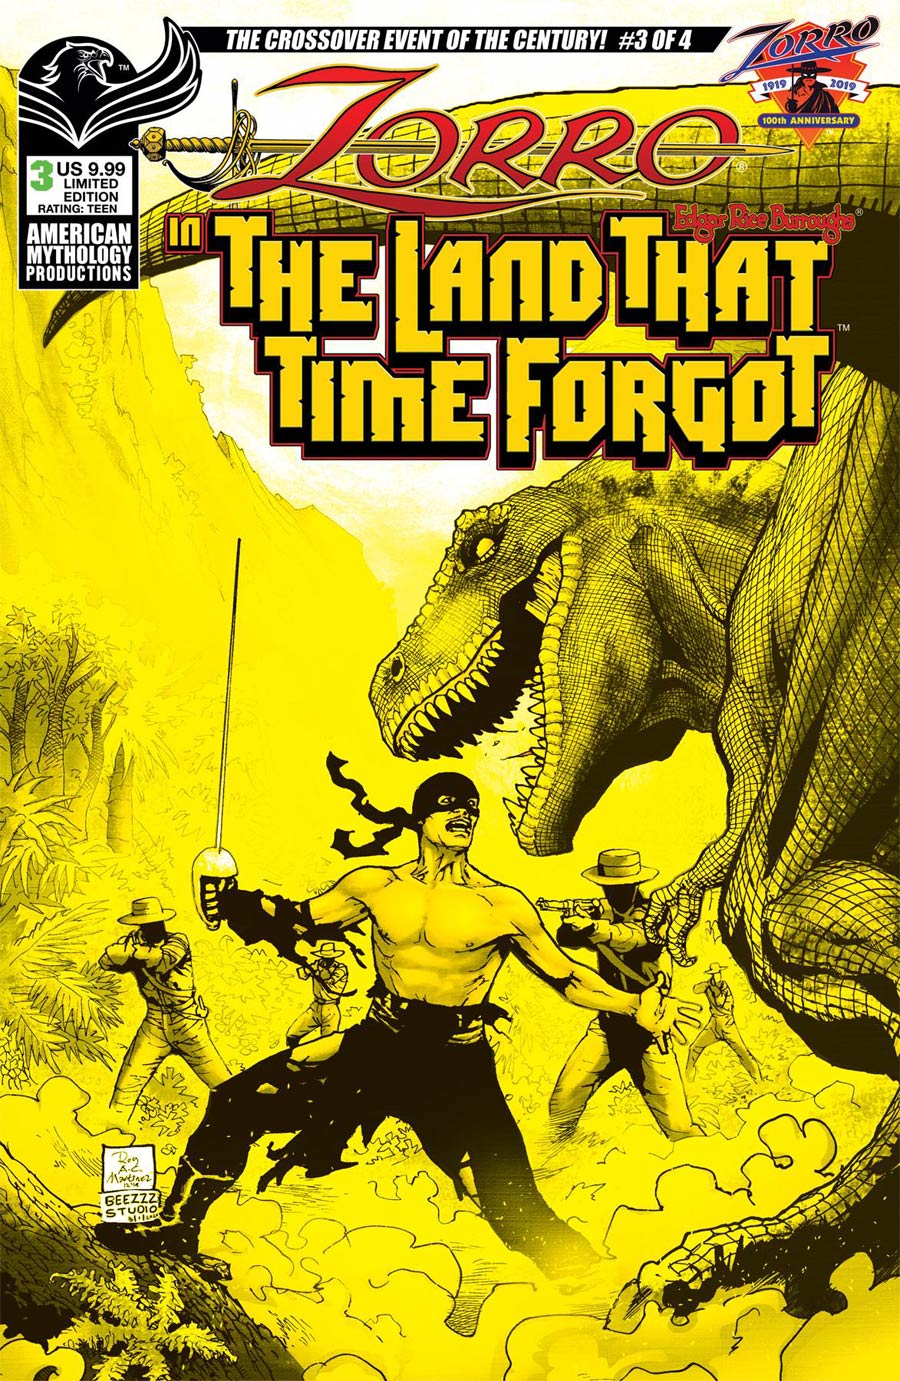 Zorro In The Land That Time Forgot #3 Cover B Limited Edition Roy Allan Martinez Pulp Cover